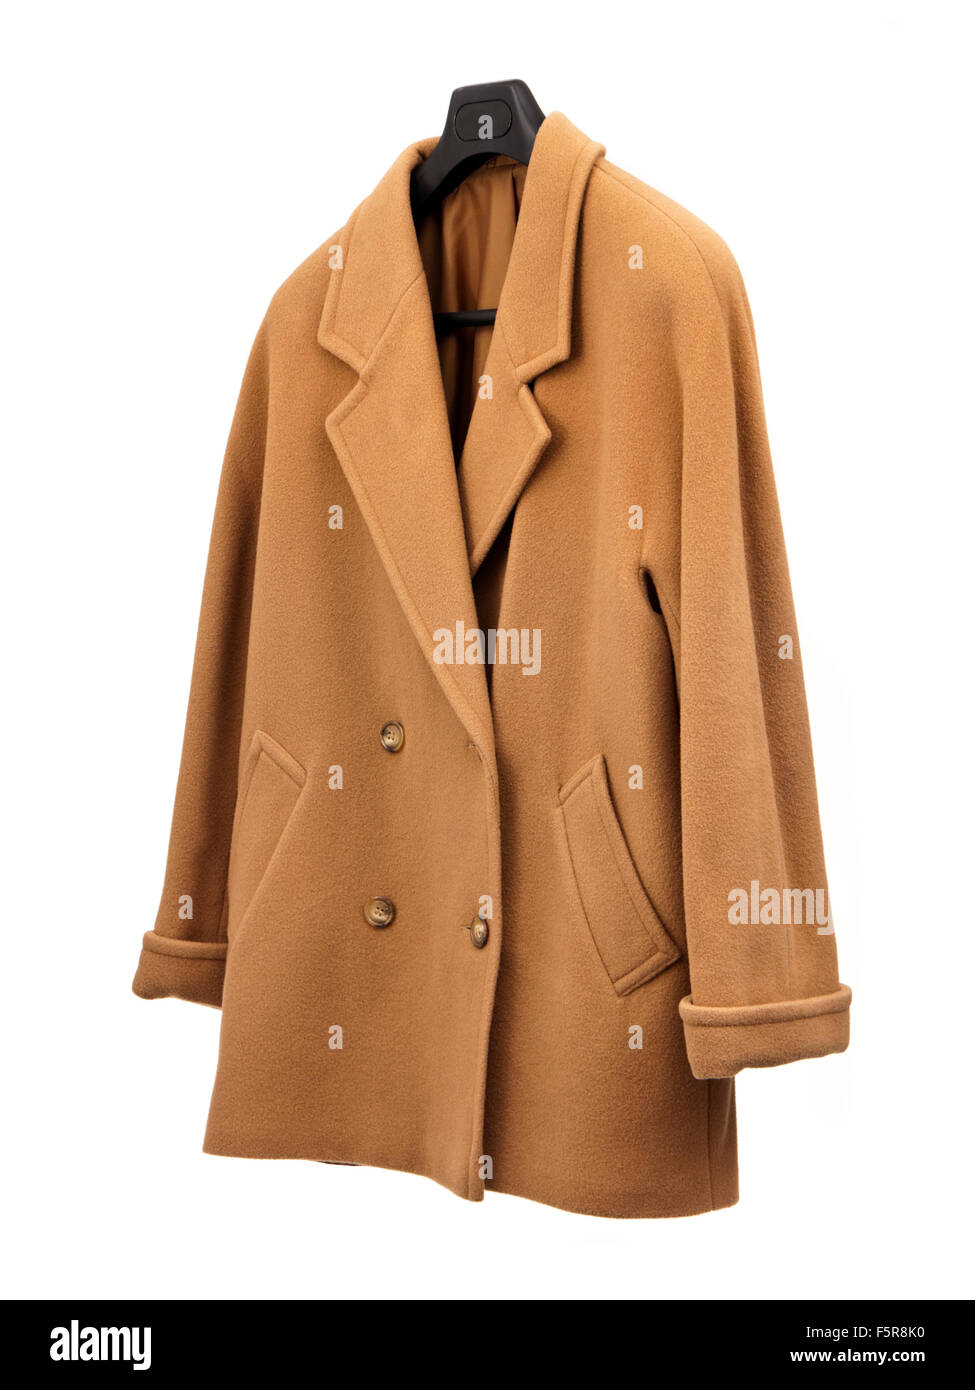 St Michael (Marks and Spencer) pure new wool winter coat Stock Photo